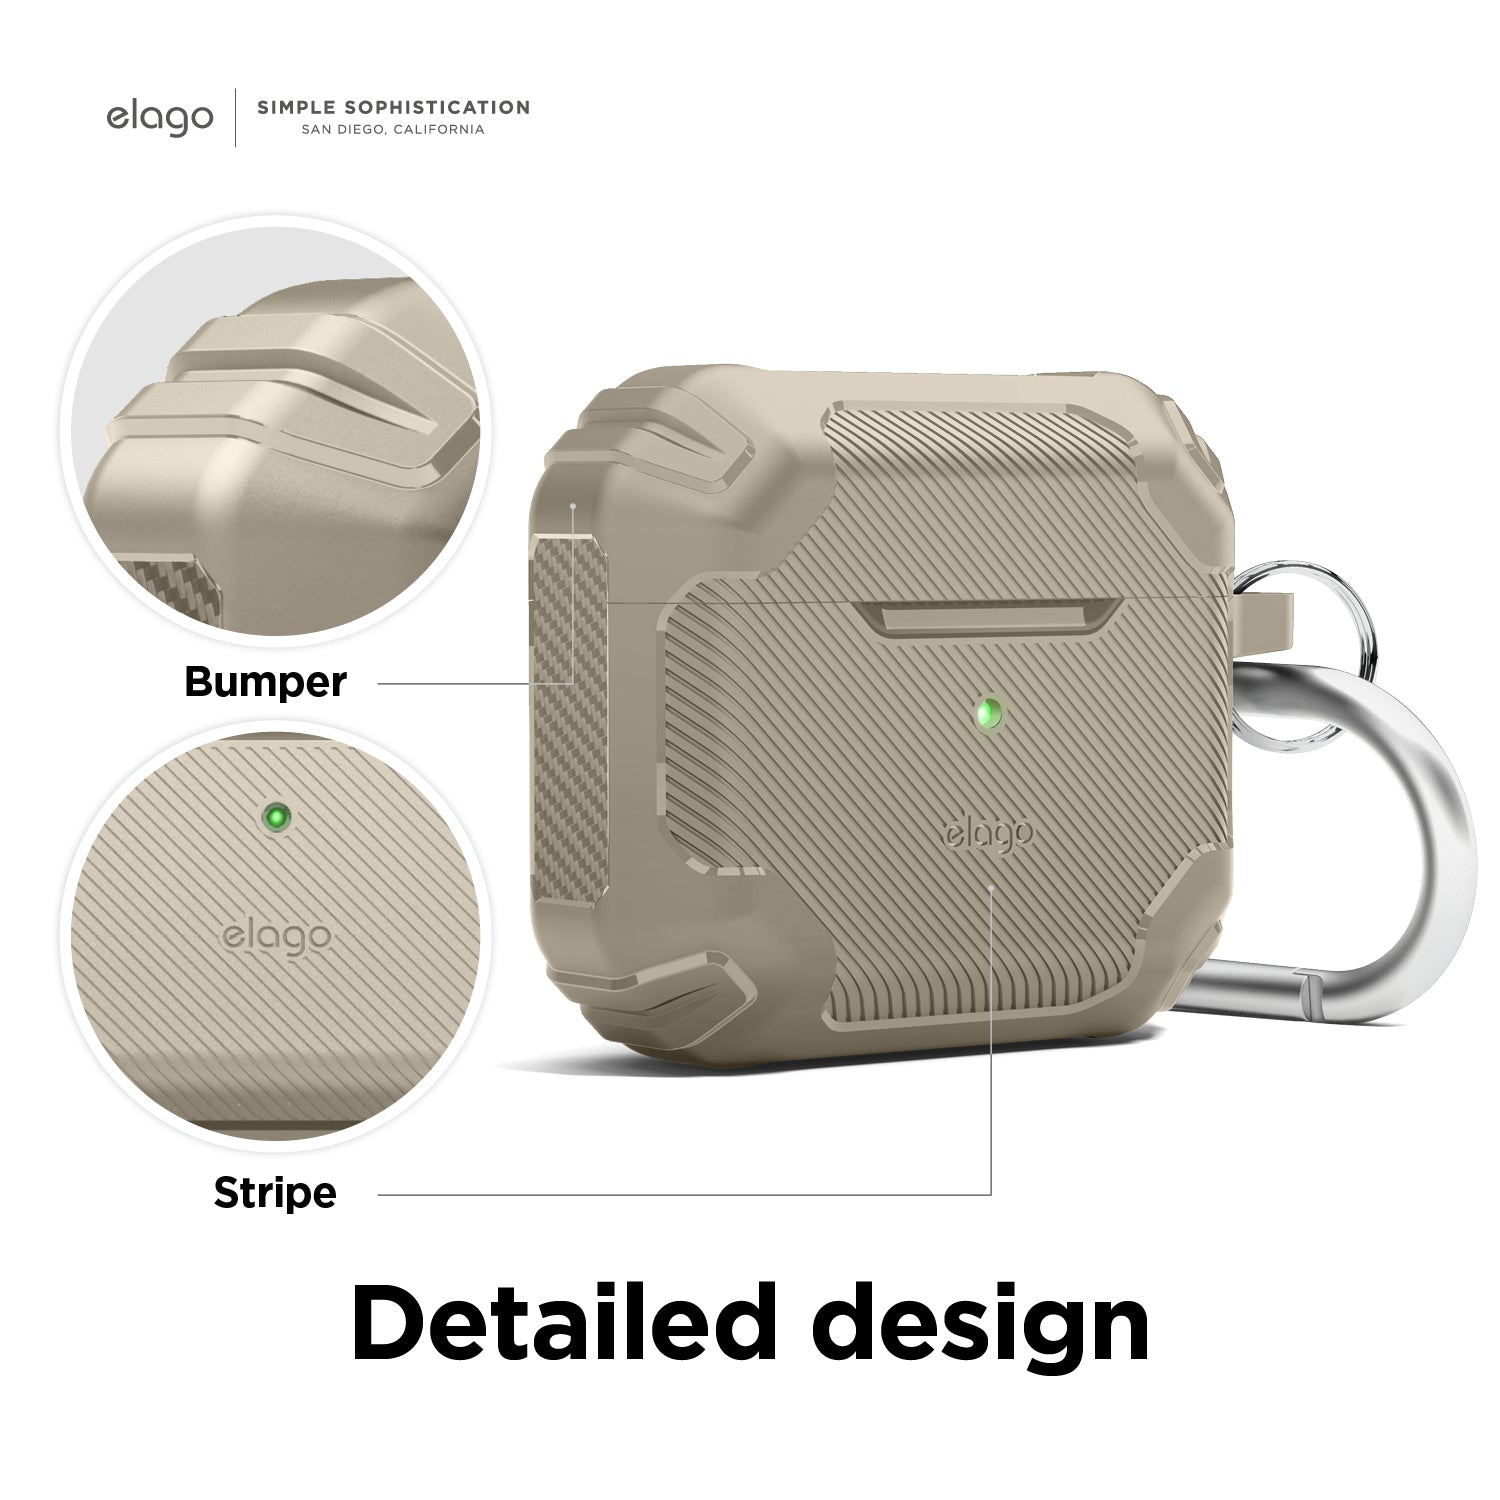 elago Gamaboy AW5 AirPods 3rd Generation Case [3 Colors]